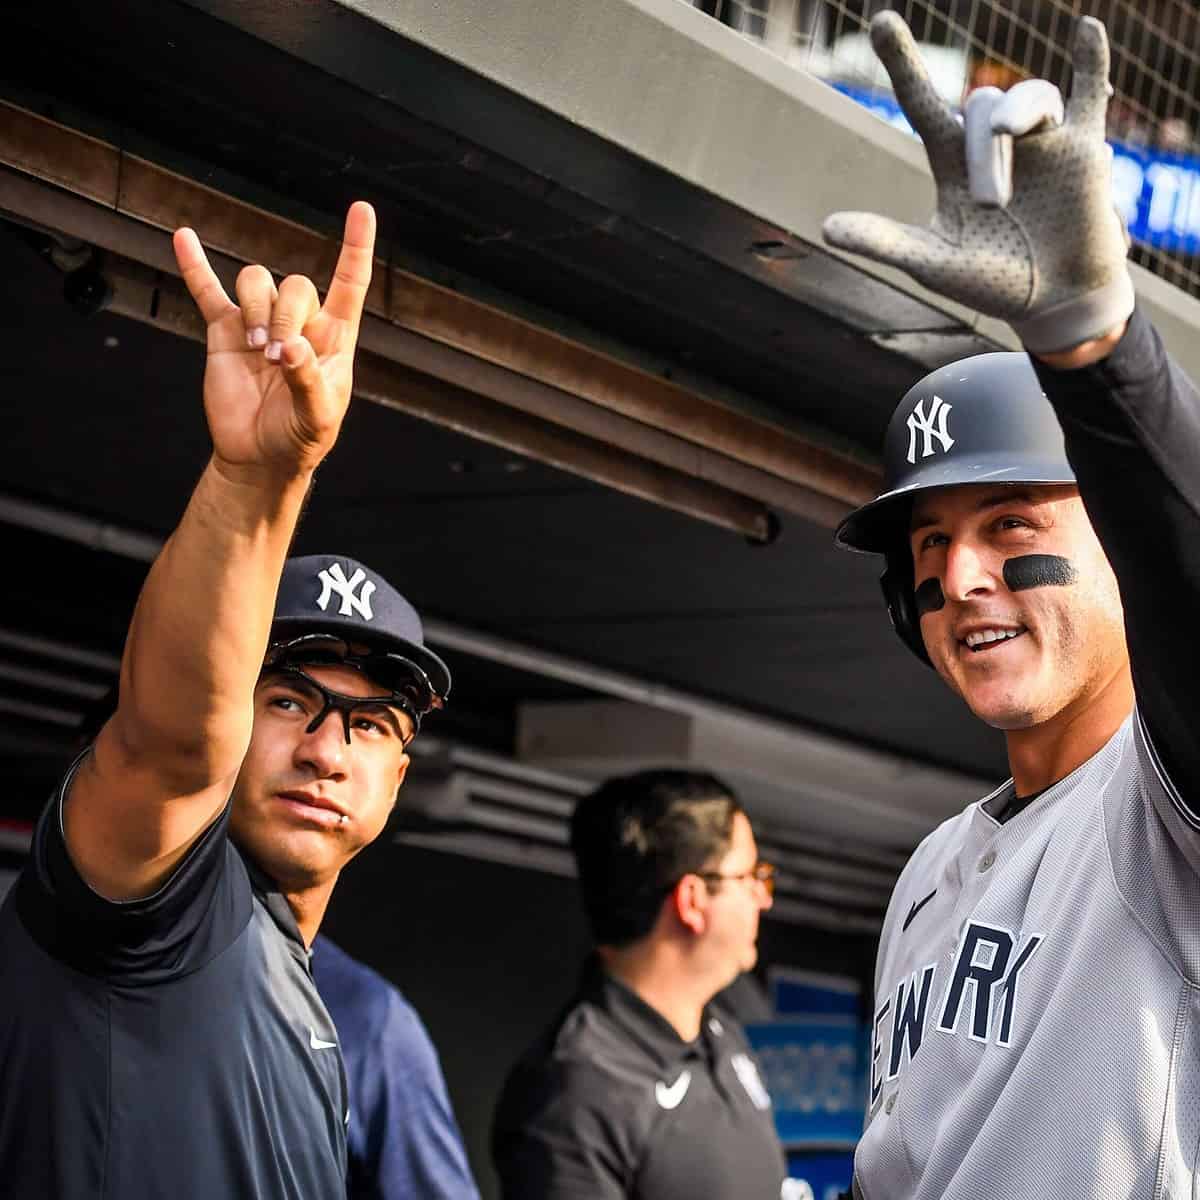 Anthony Rizzo and Gleyber Torres of the Yankees